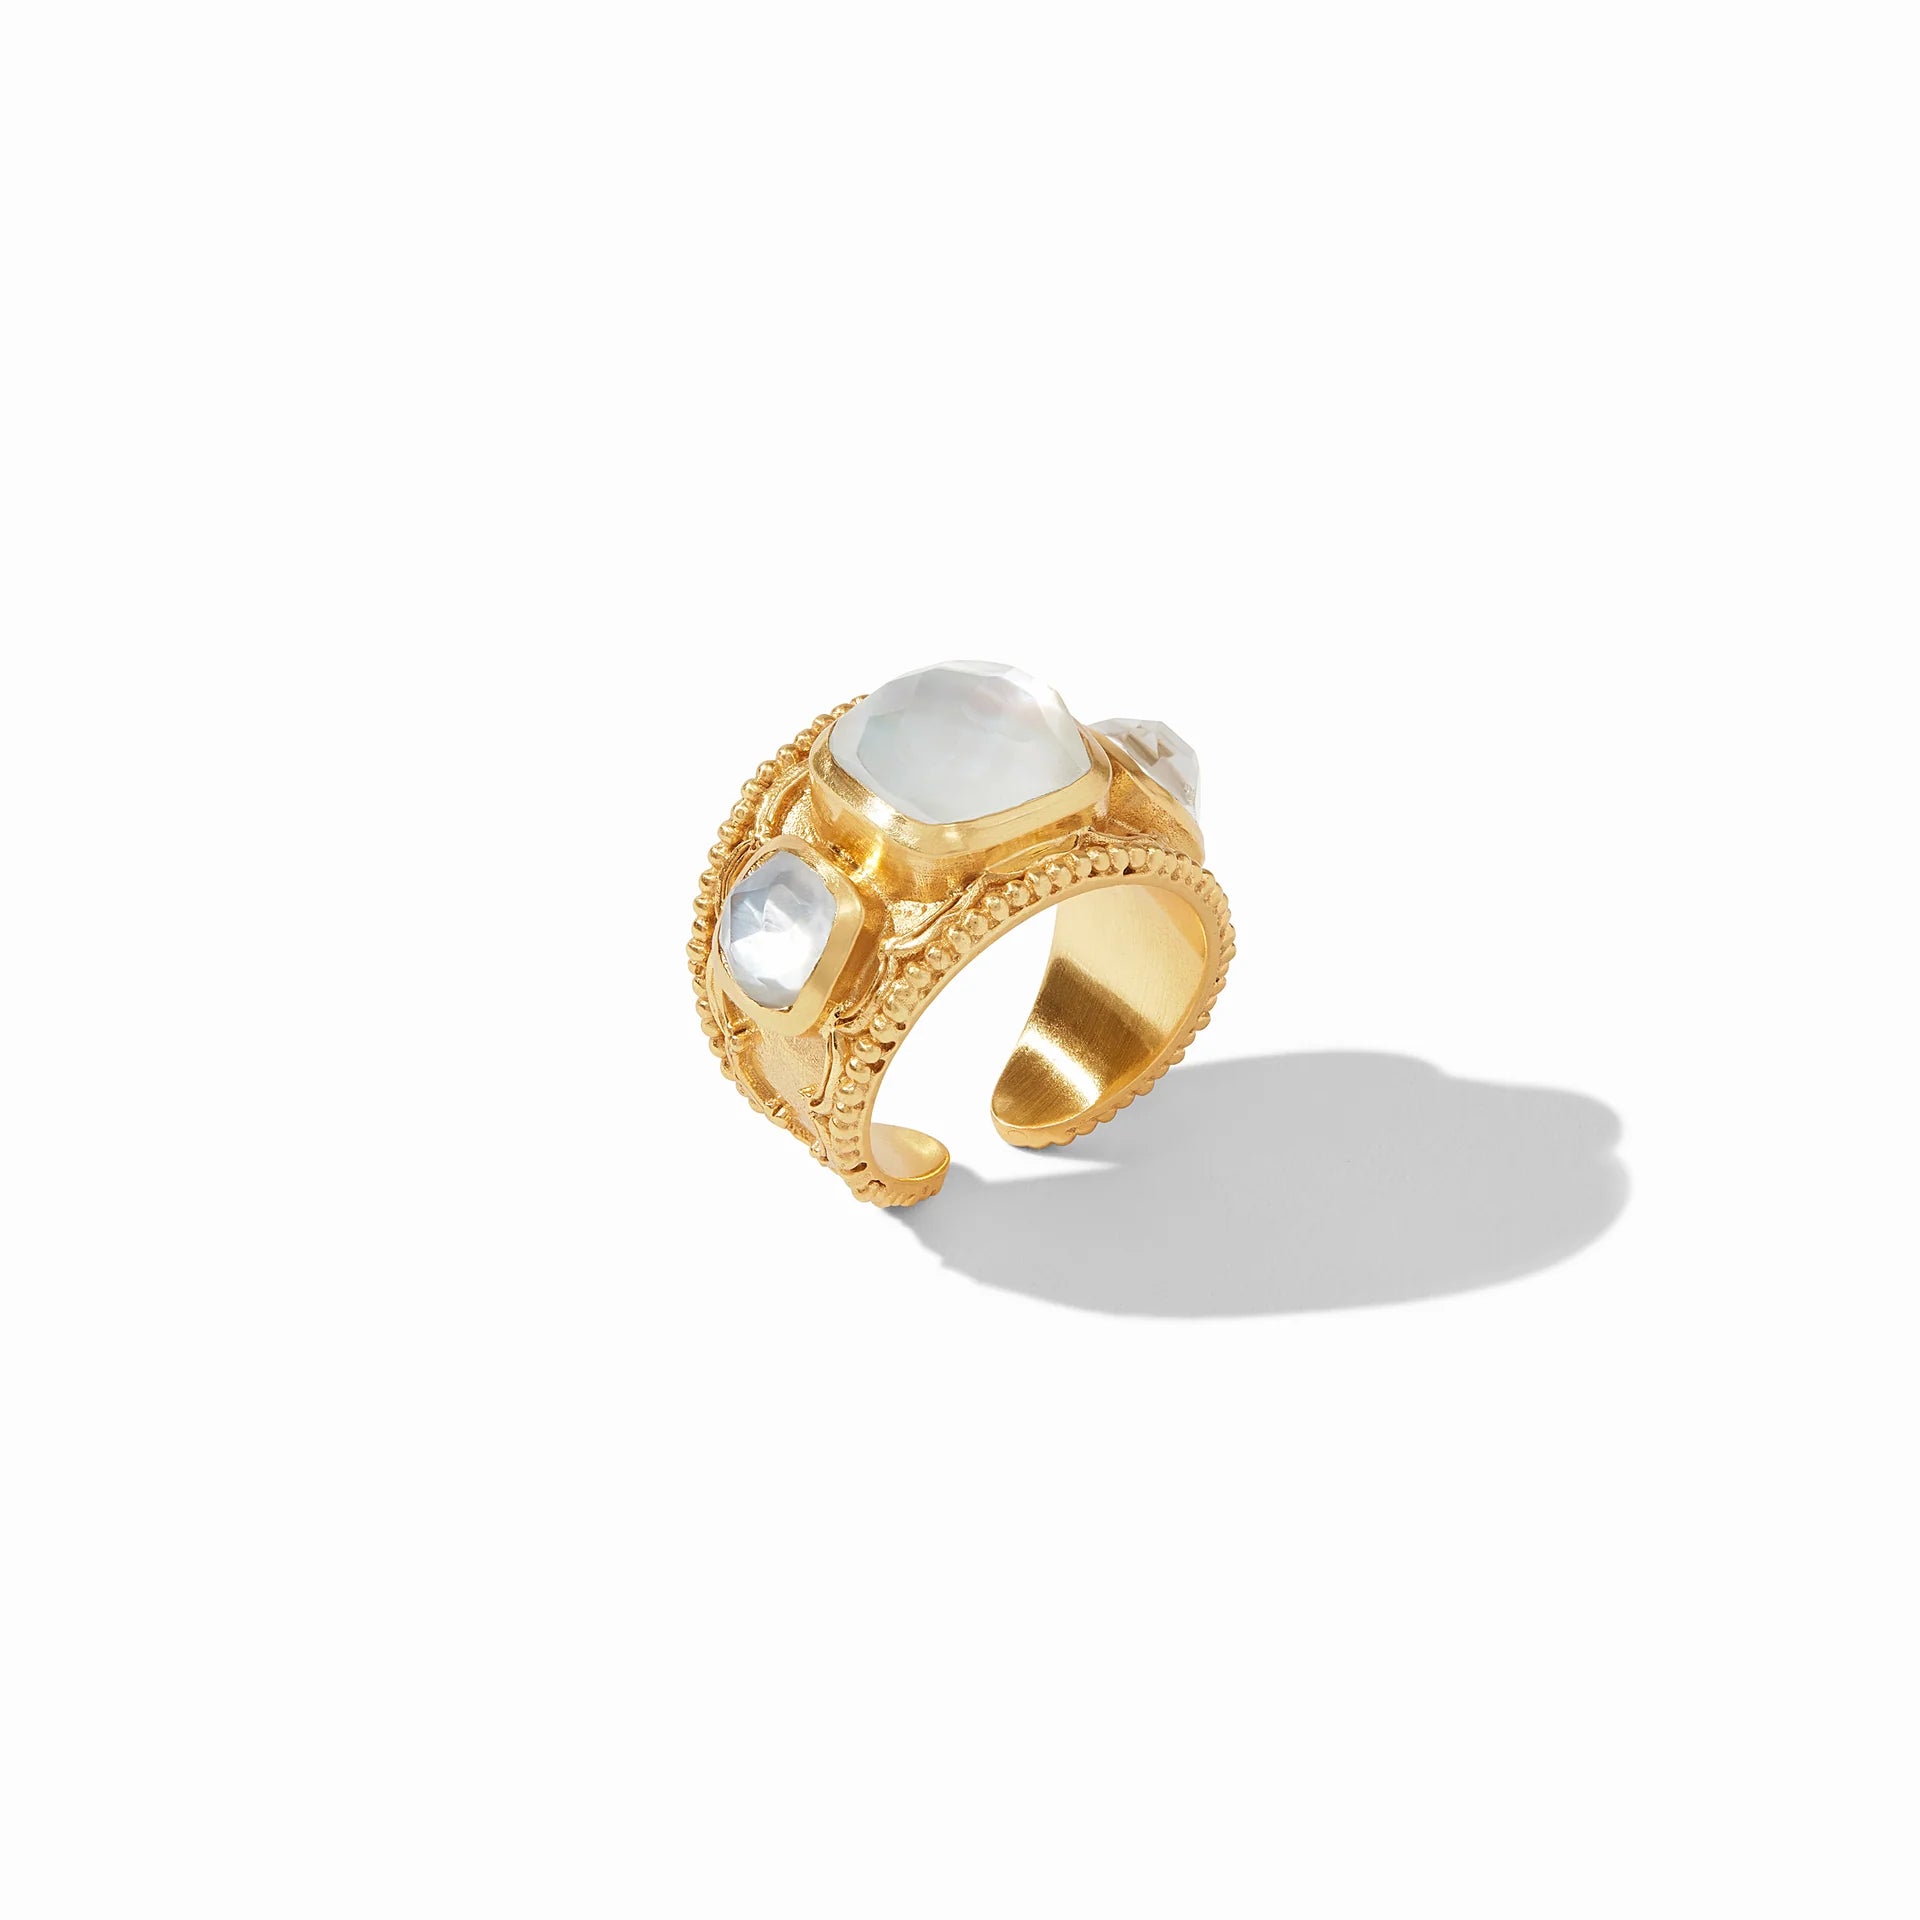 Trieste_Statement_Ring_Iridescent_Clear_Crystal_Standing_Centered - Water Street Jewelers